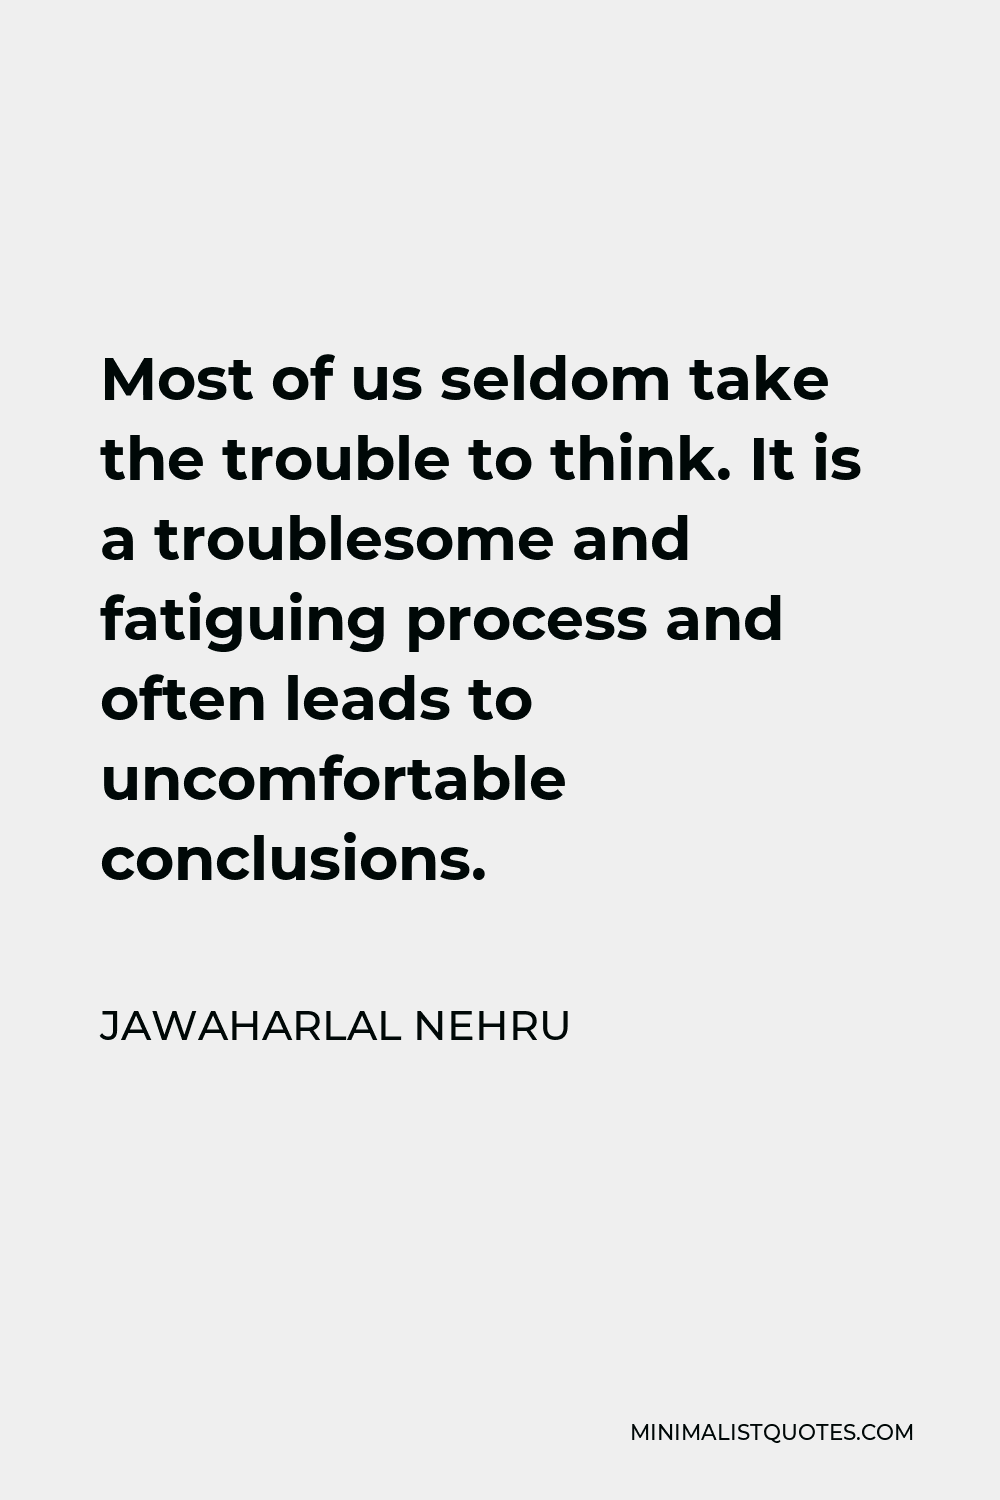 Jawaharlal Nehru Quote - Most of us seldom take the trouble to think. It is a troublesome and fatiguing process and often leads to uncomfortable conclusions.